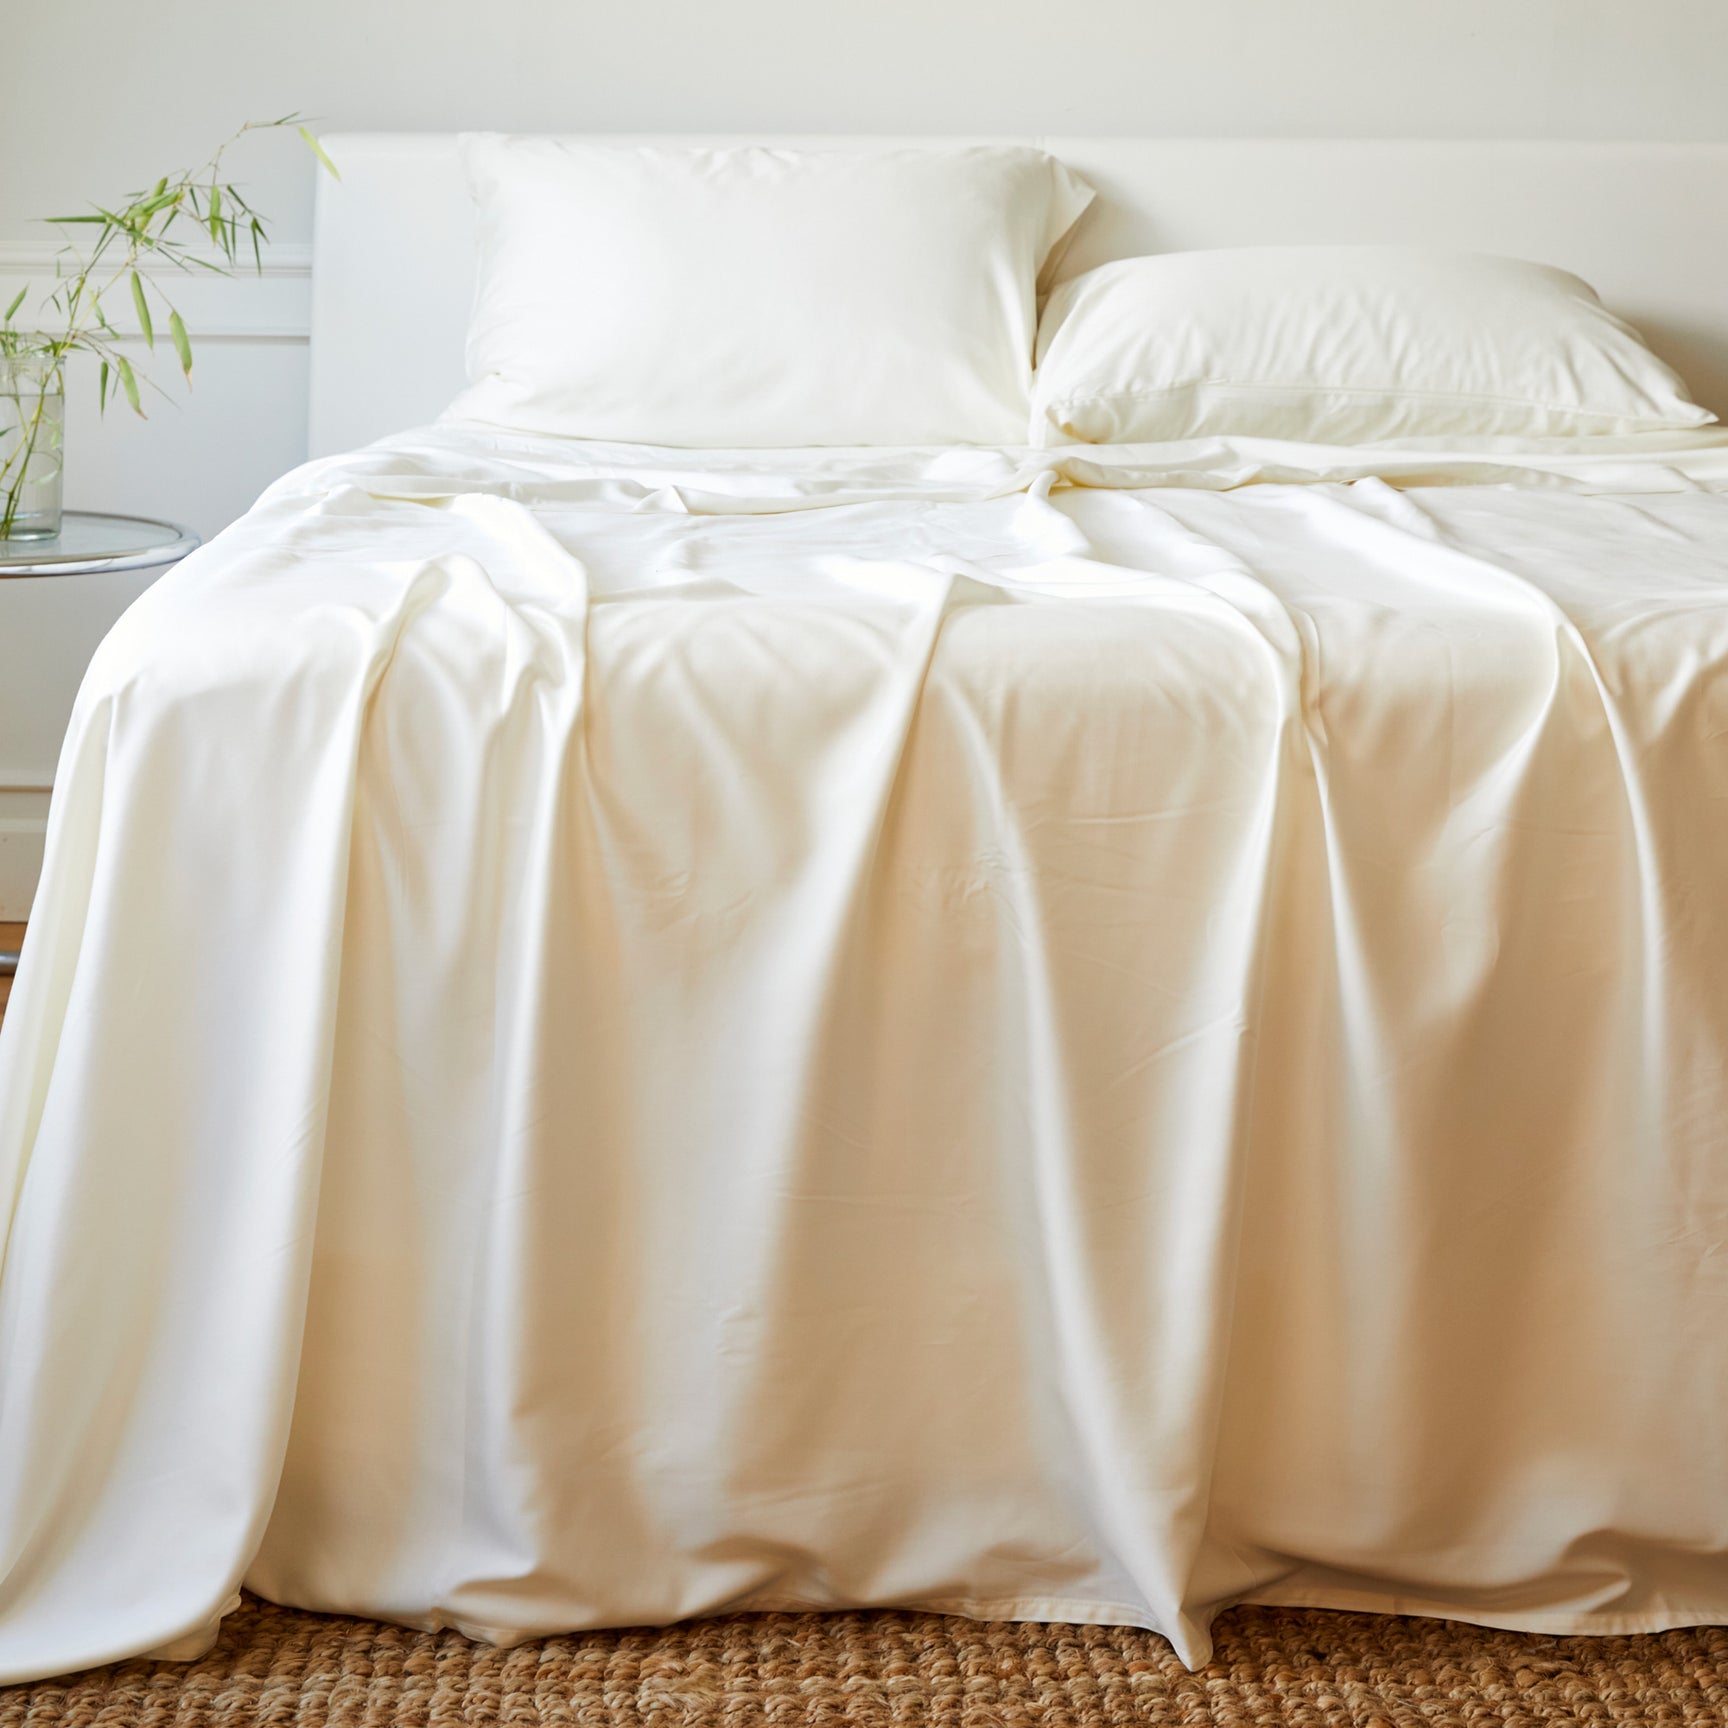 BedVoyage | Shop the Luxurious Bamboo Bedding,Towels & Home Essentials